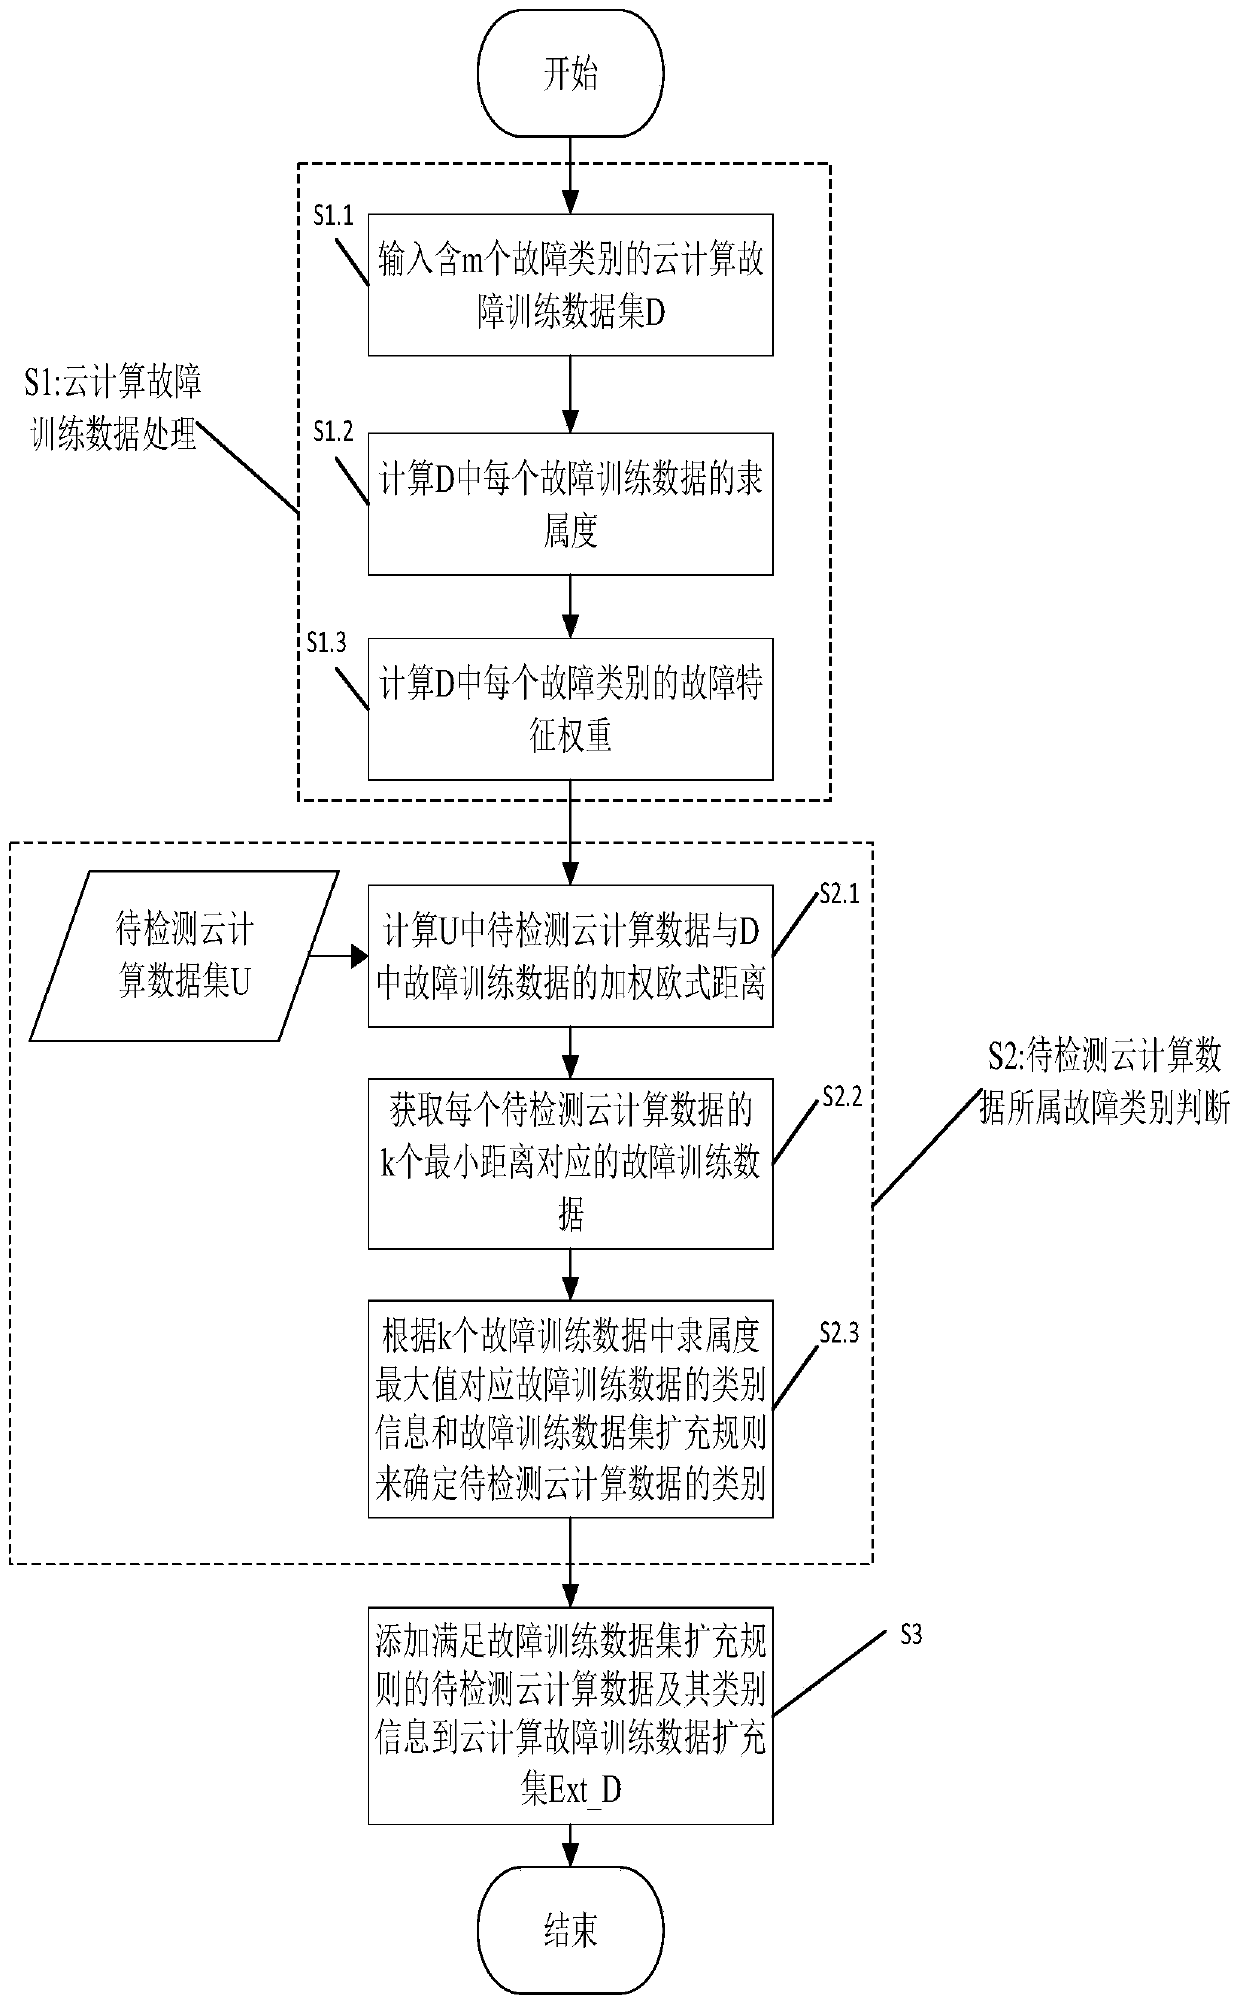 A cloud computing fault data detection method and system